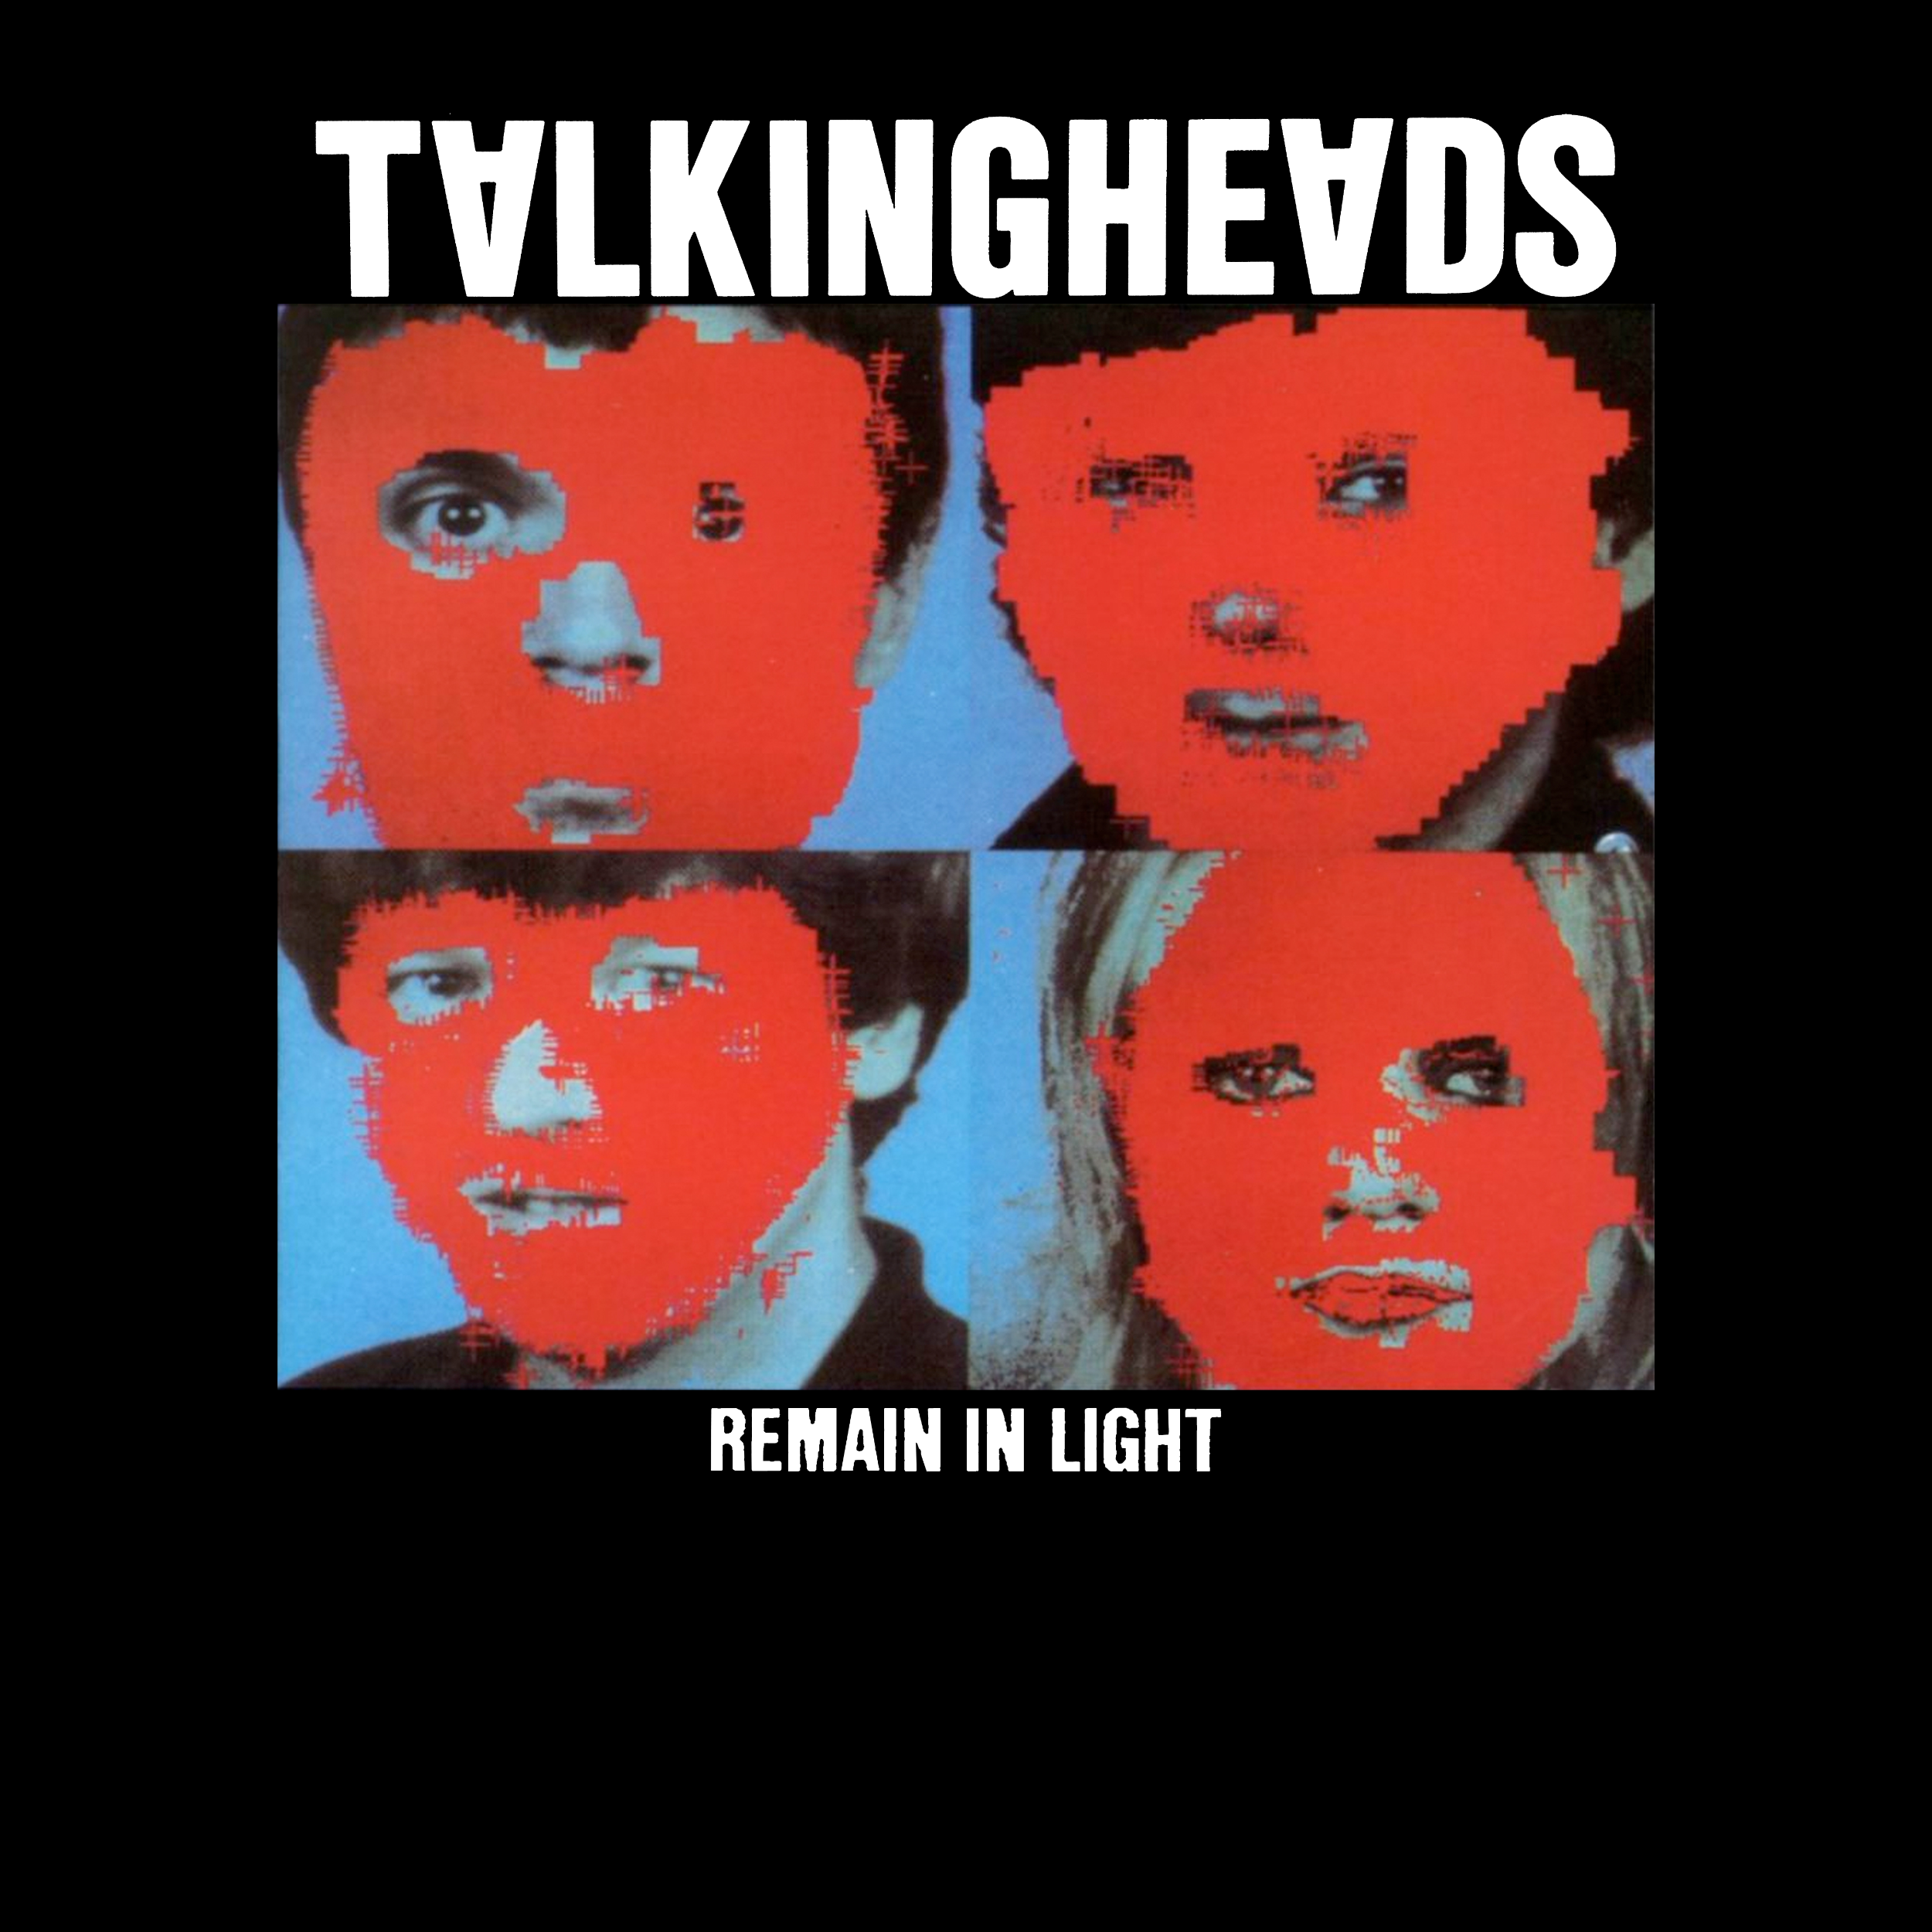 Talking Heads Remain In Light Classic Tee